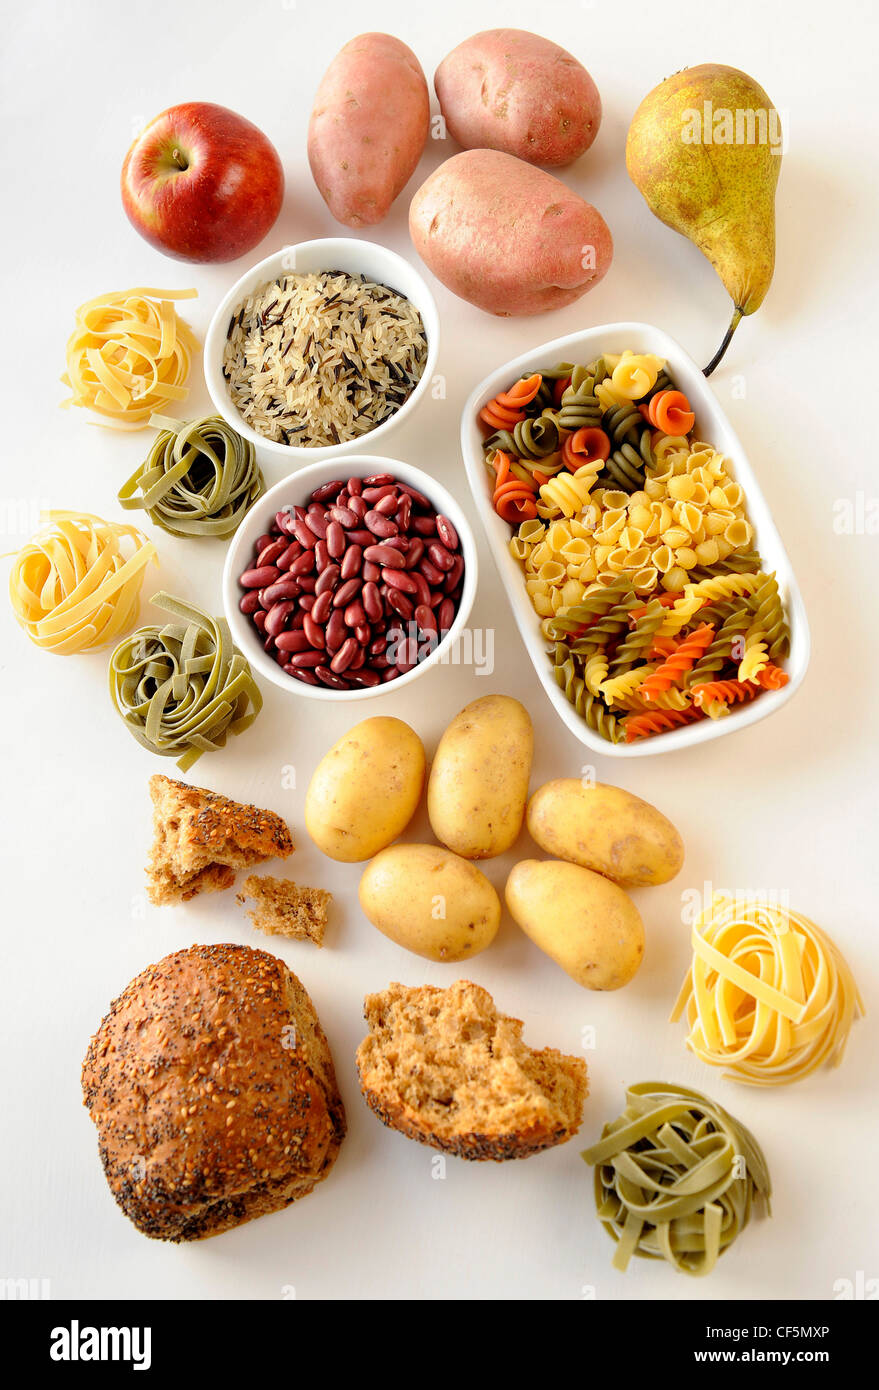 Carbohydrates Stock Photo